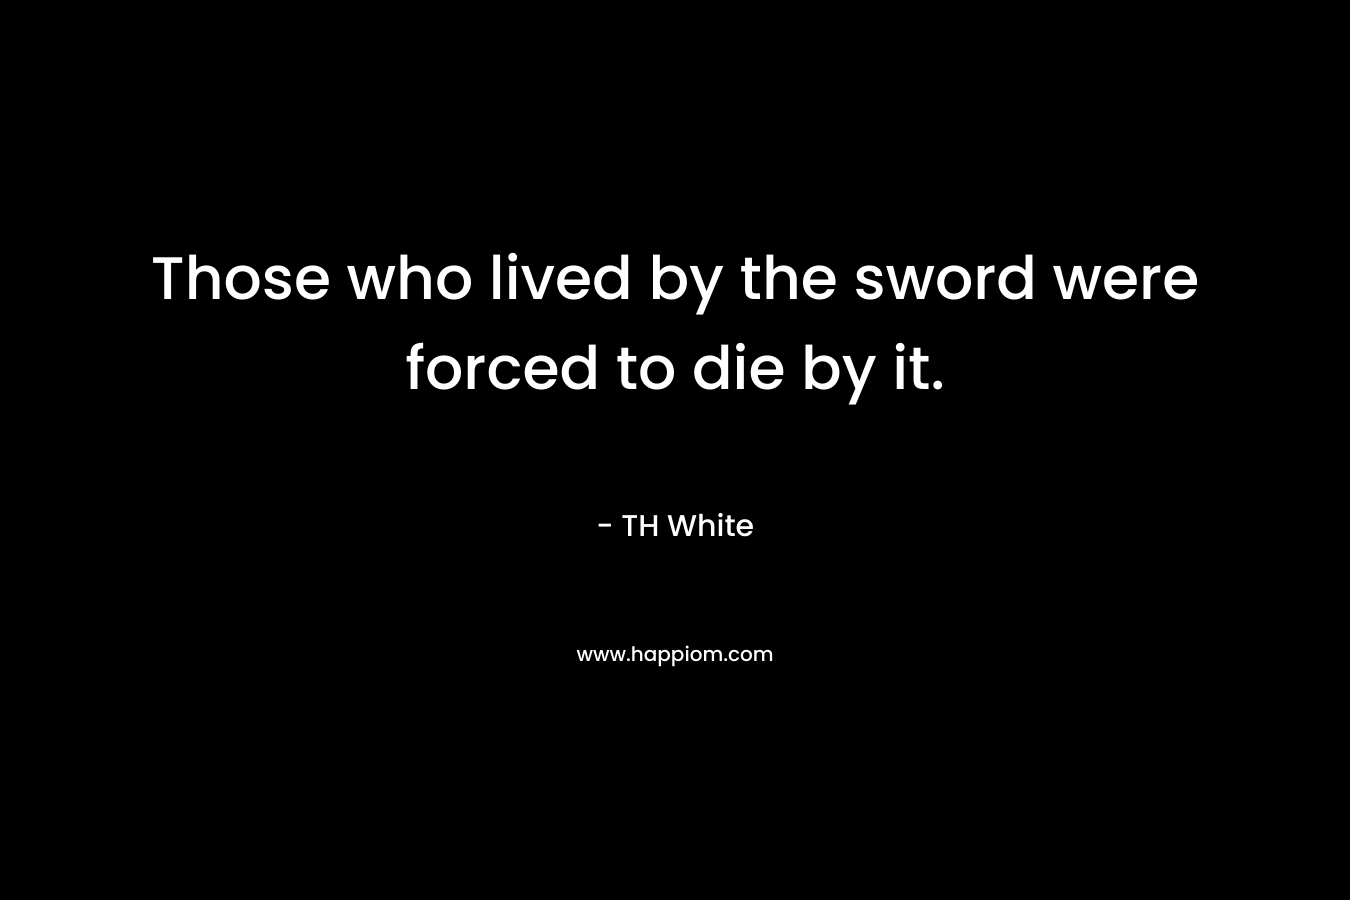 Those who lived by the sword were forced to die by it. – TH White